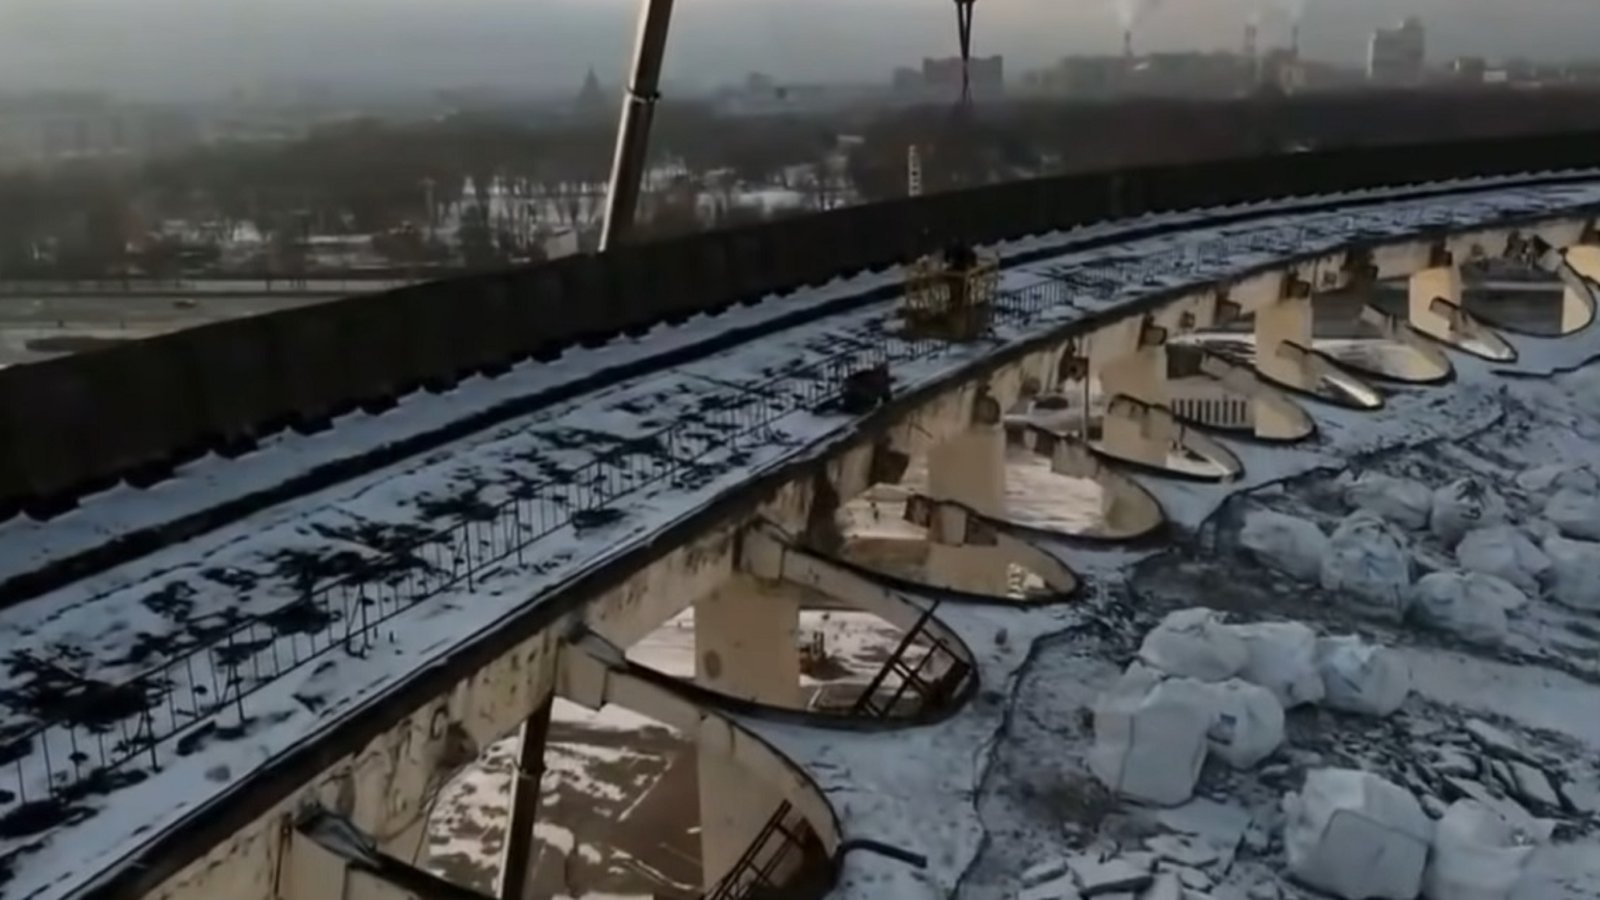 Dramatic drone footage shows the horrifying collapse of SKK ice hockey stadium in St. Petersburg